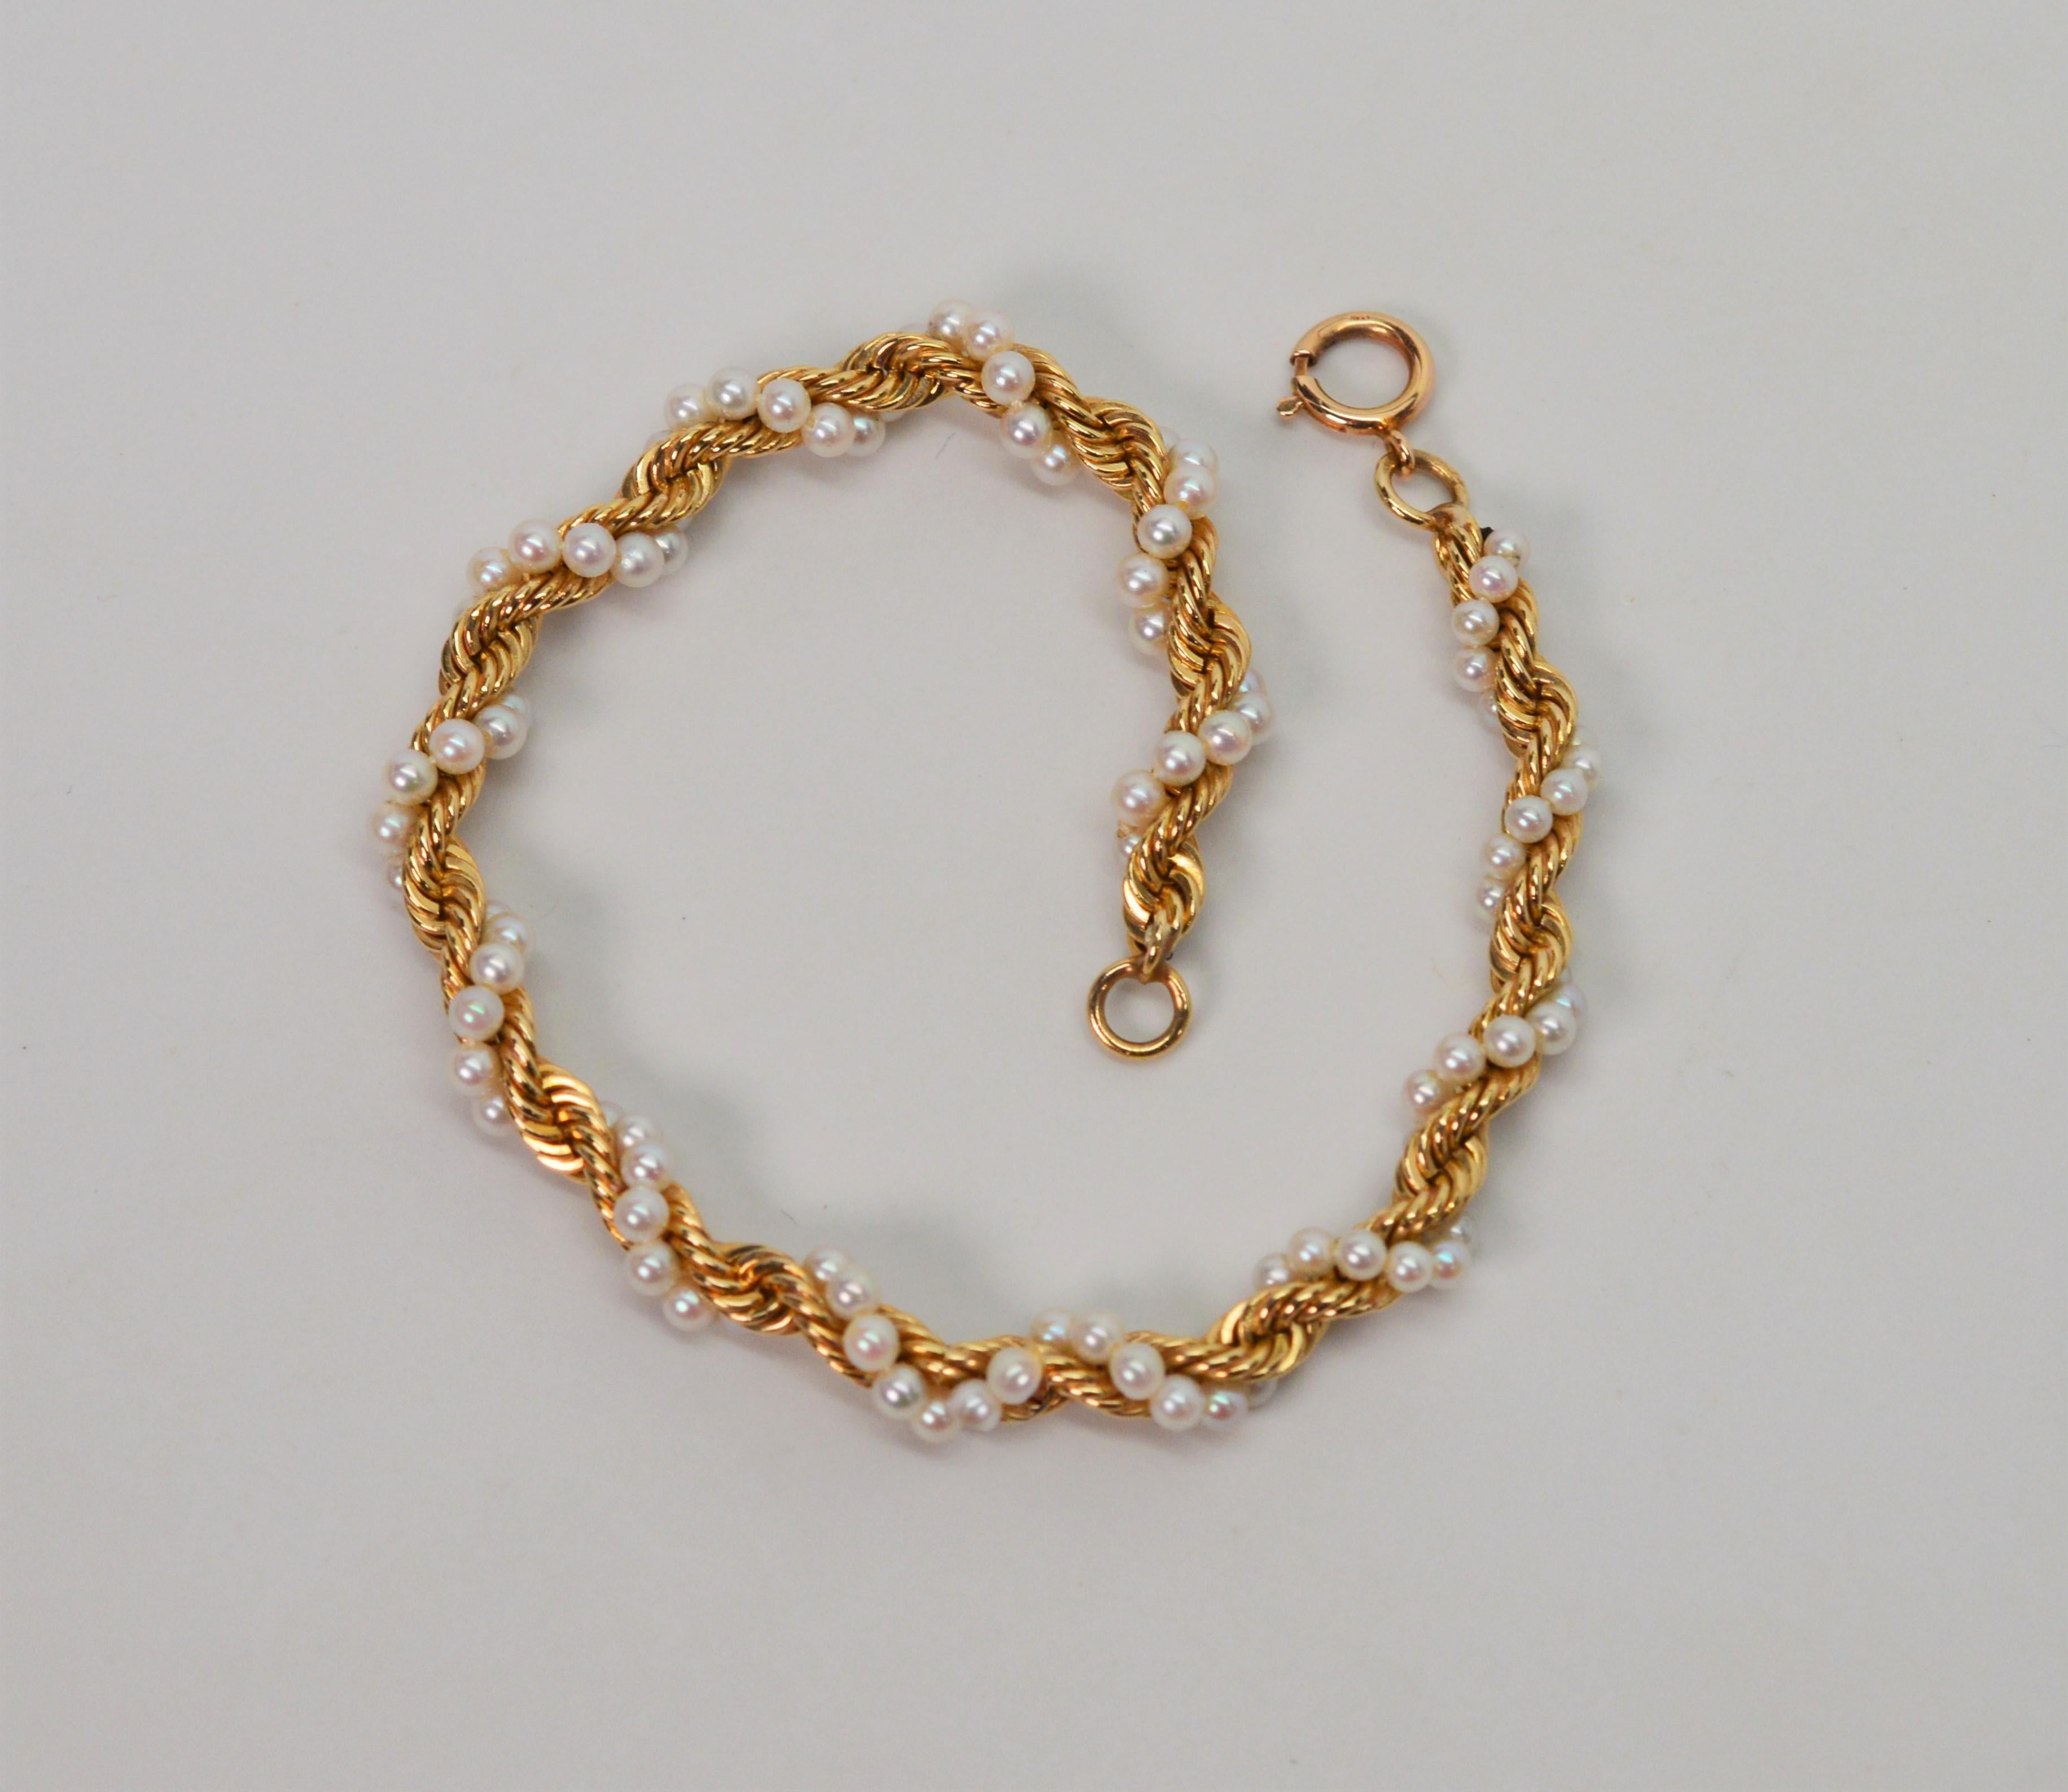 Simple and elegant. Ten carat braided yellow gold rope chain wrapped with a creamy white strand of natural 2-1/2 mm Akoya pearls.
Measures seven inches and is finished with a spring ring closure. In gift box. 